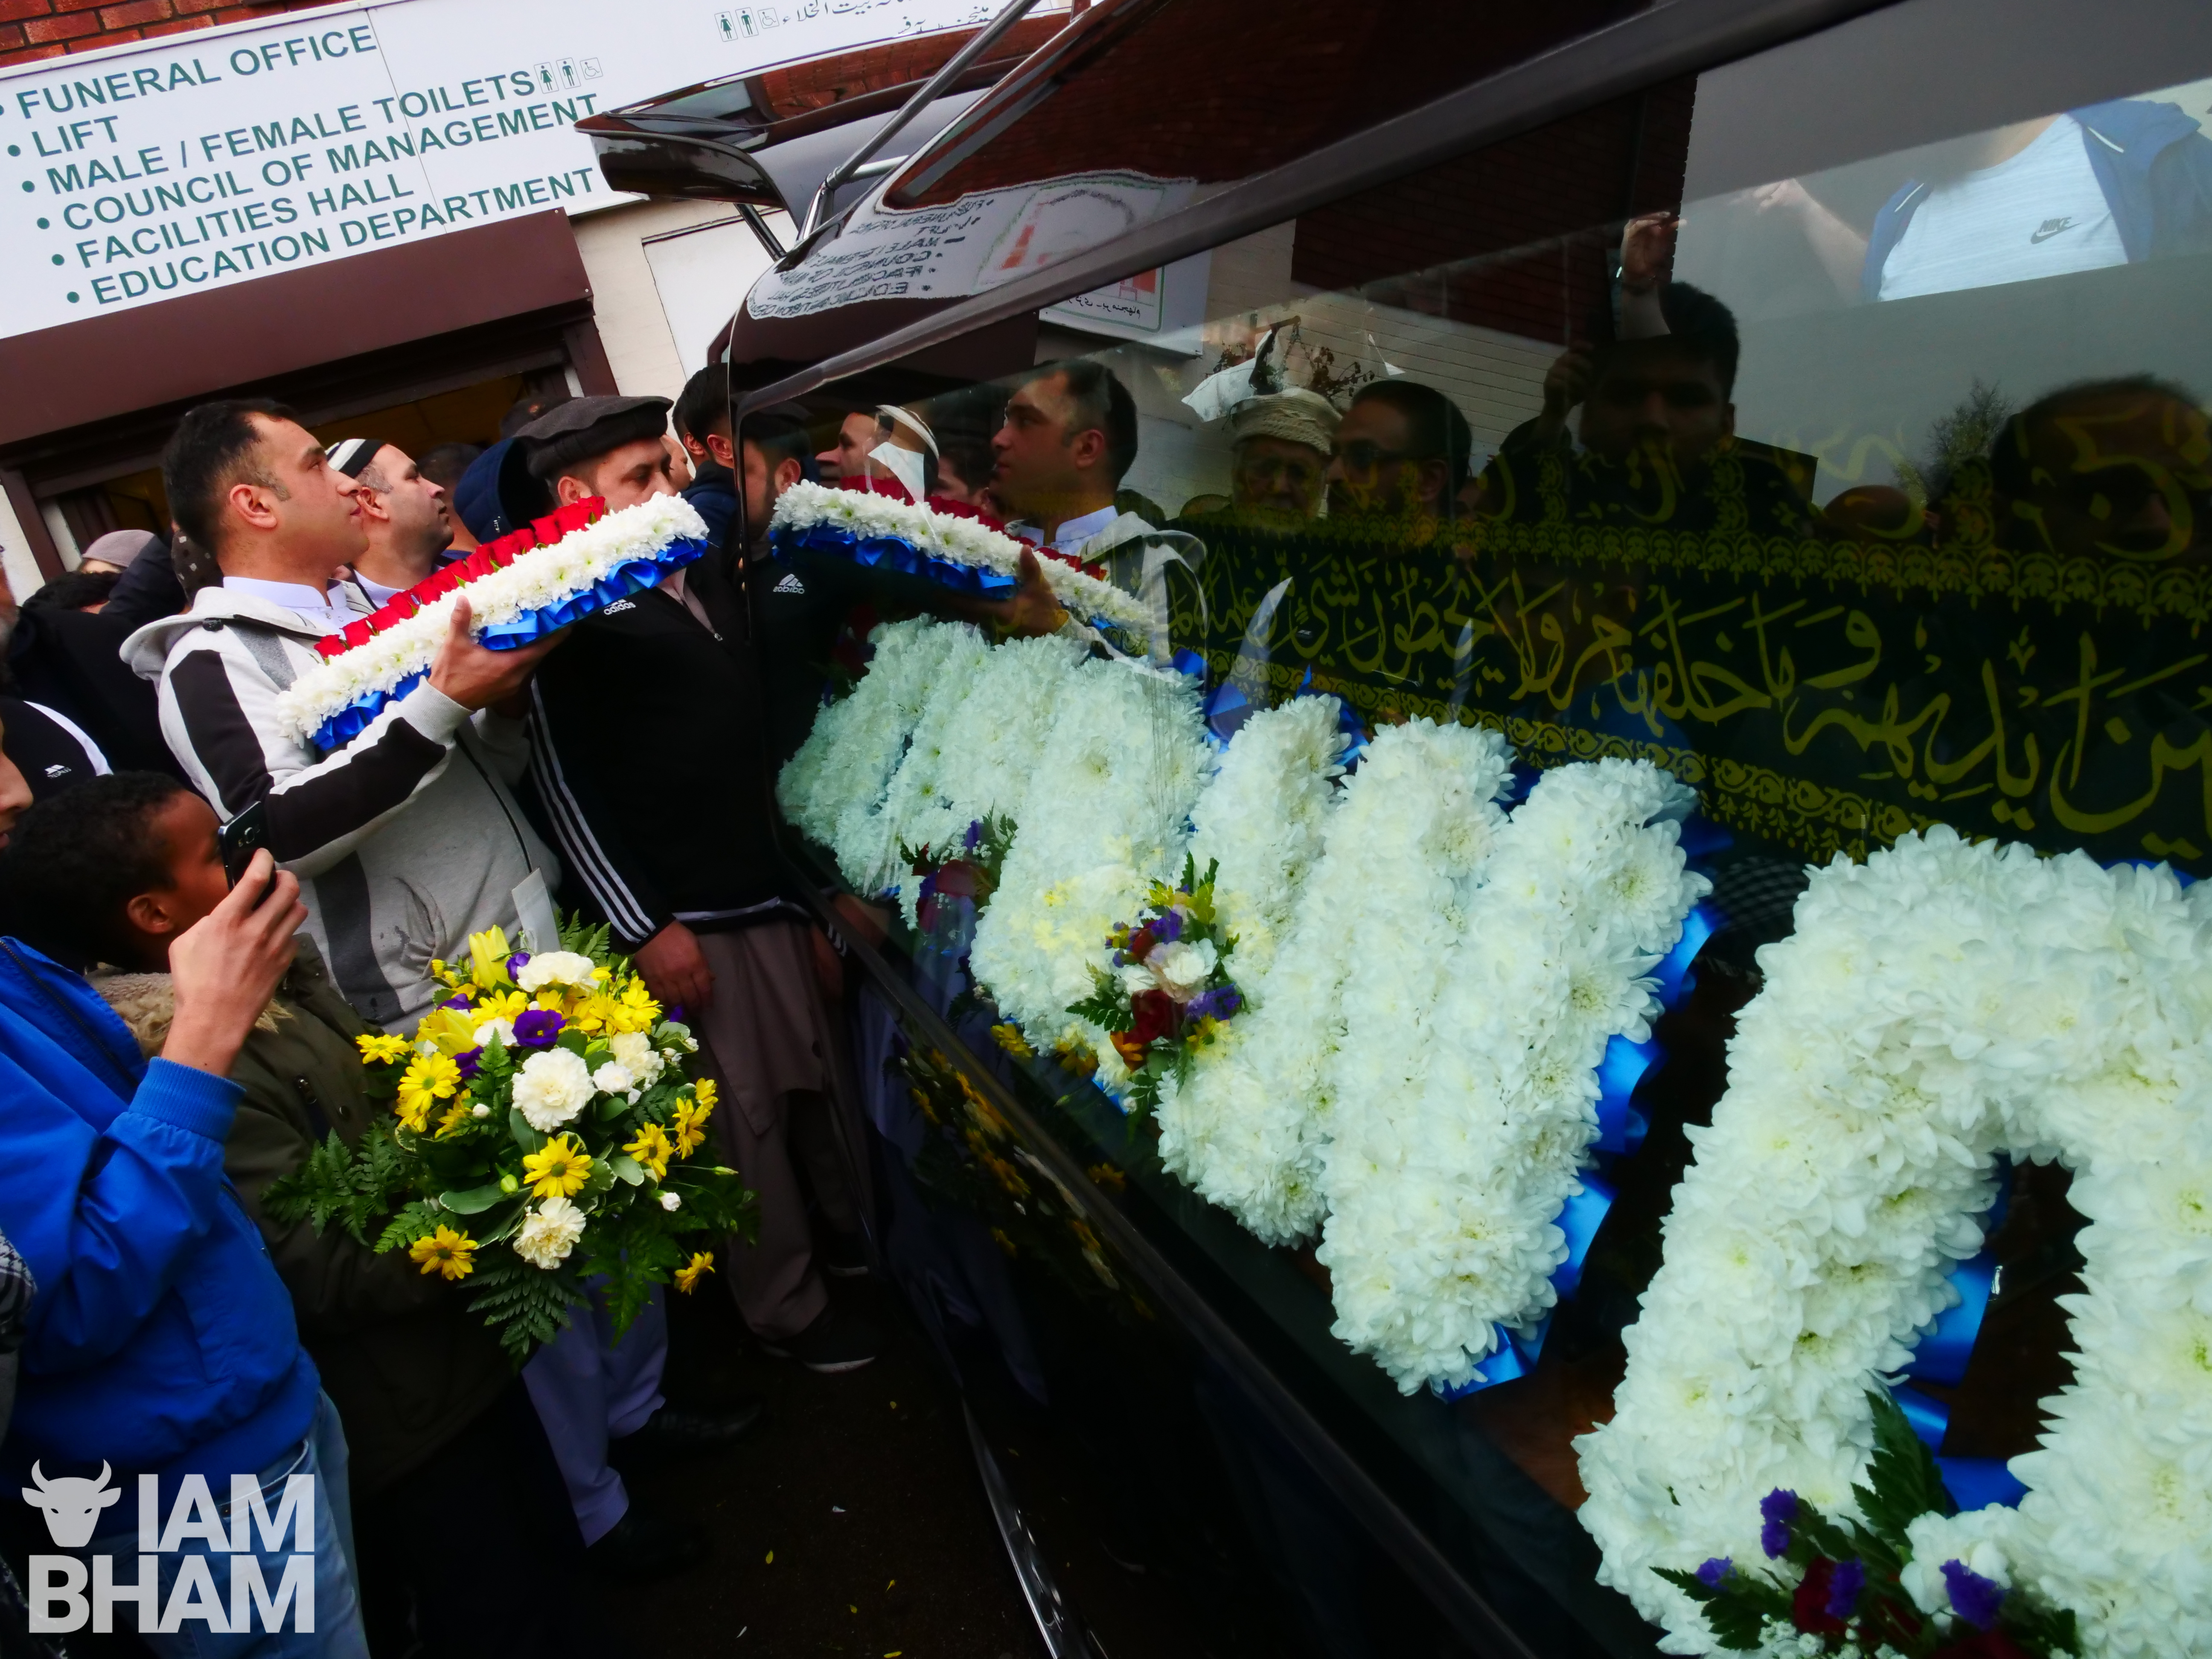 Flowers bearing the message 'Father' were placed in the hearse alongside the coffin containing Imtiaz Mohammed's body